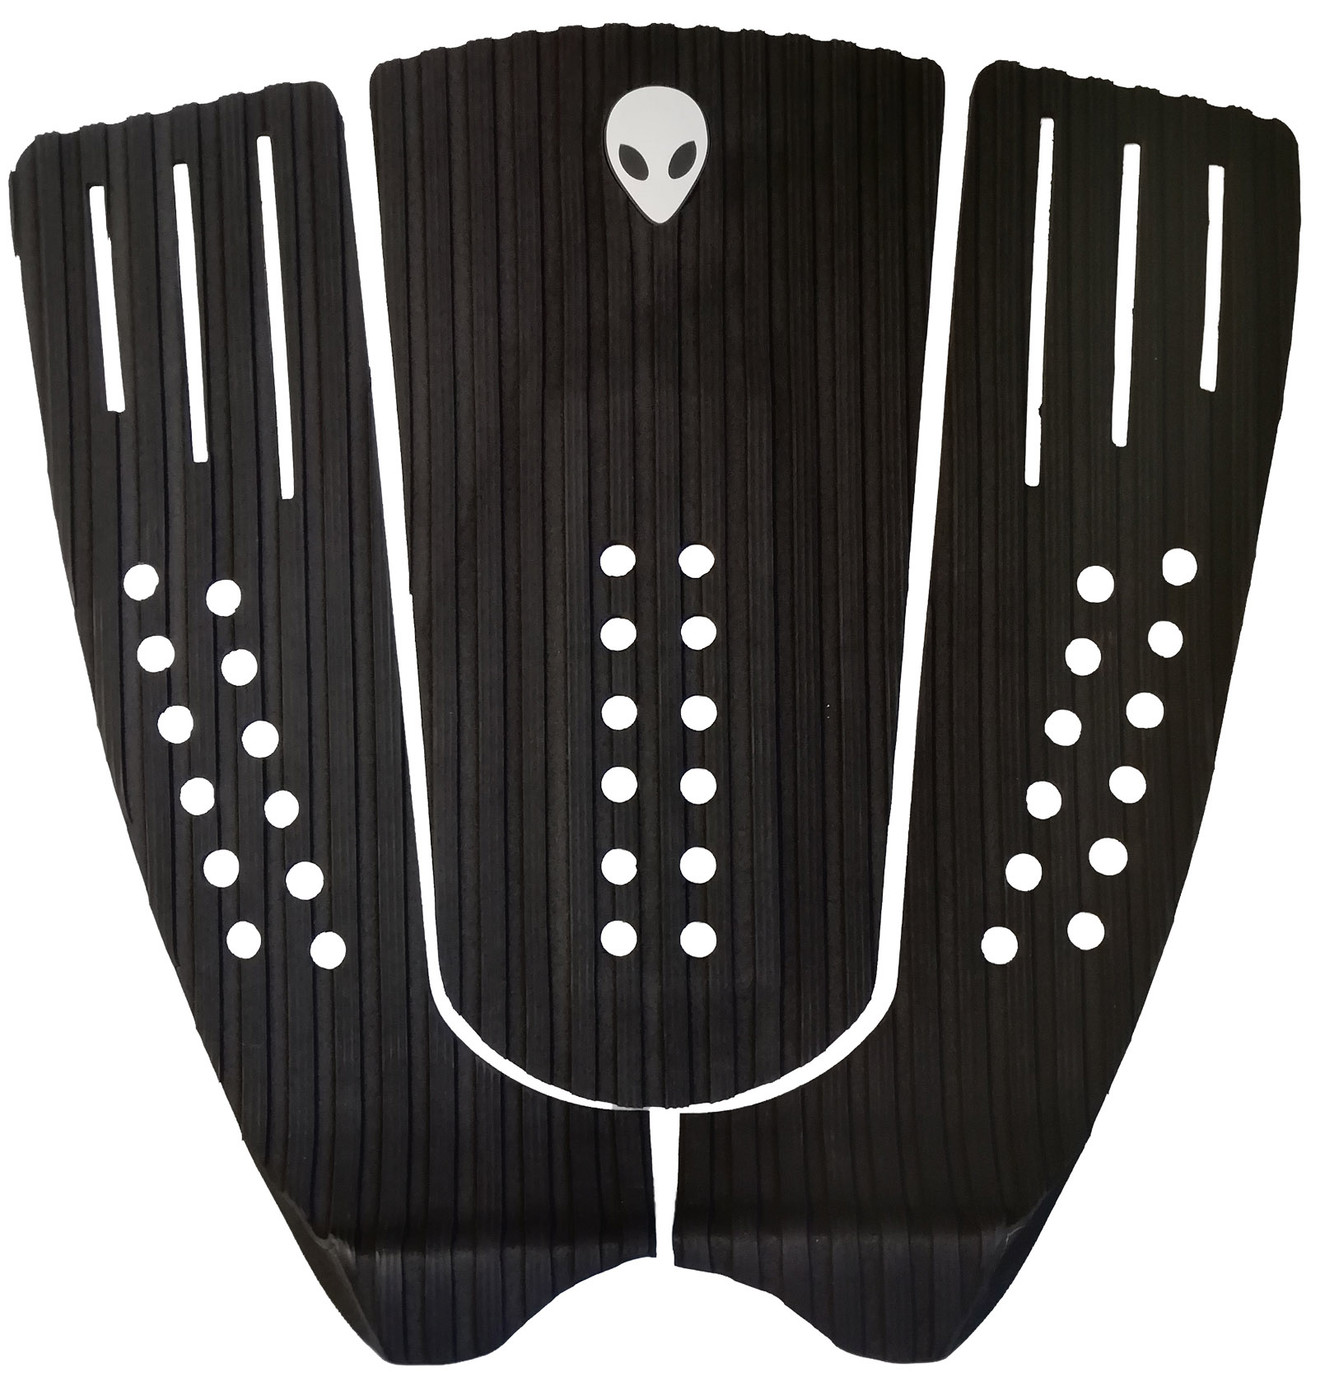 Black surfboard Tail pad line groove with slits for traction